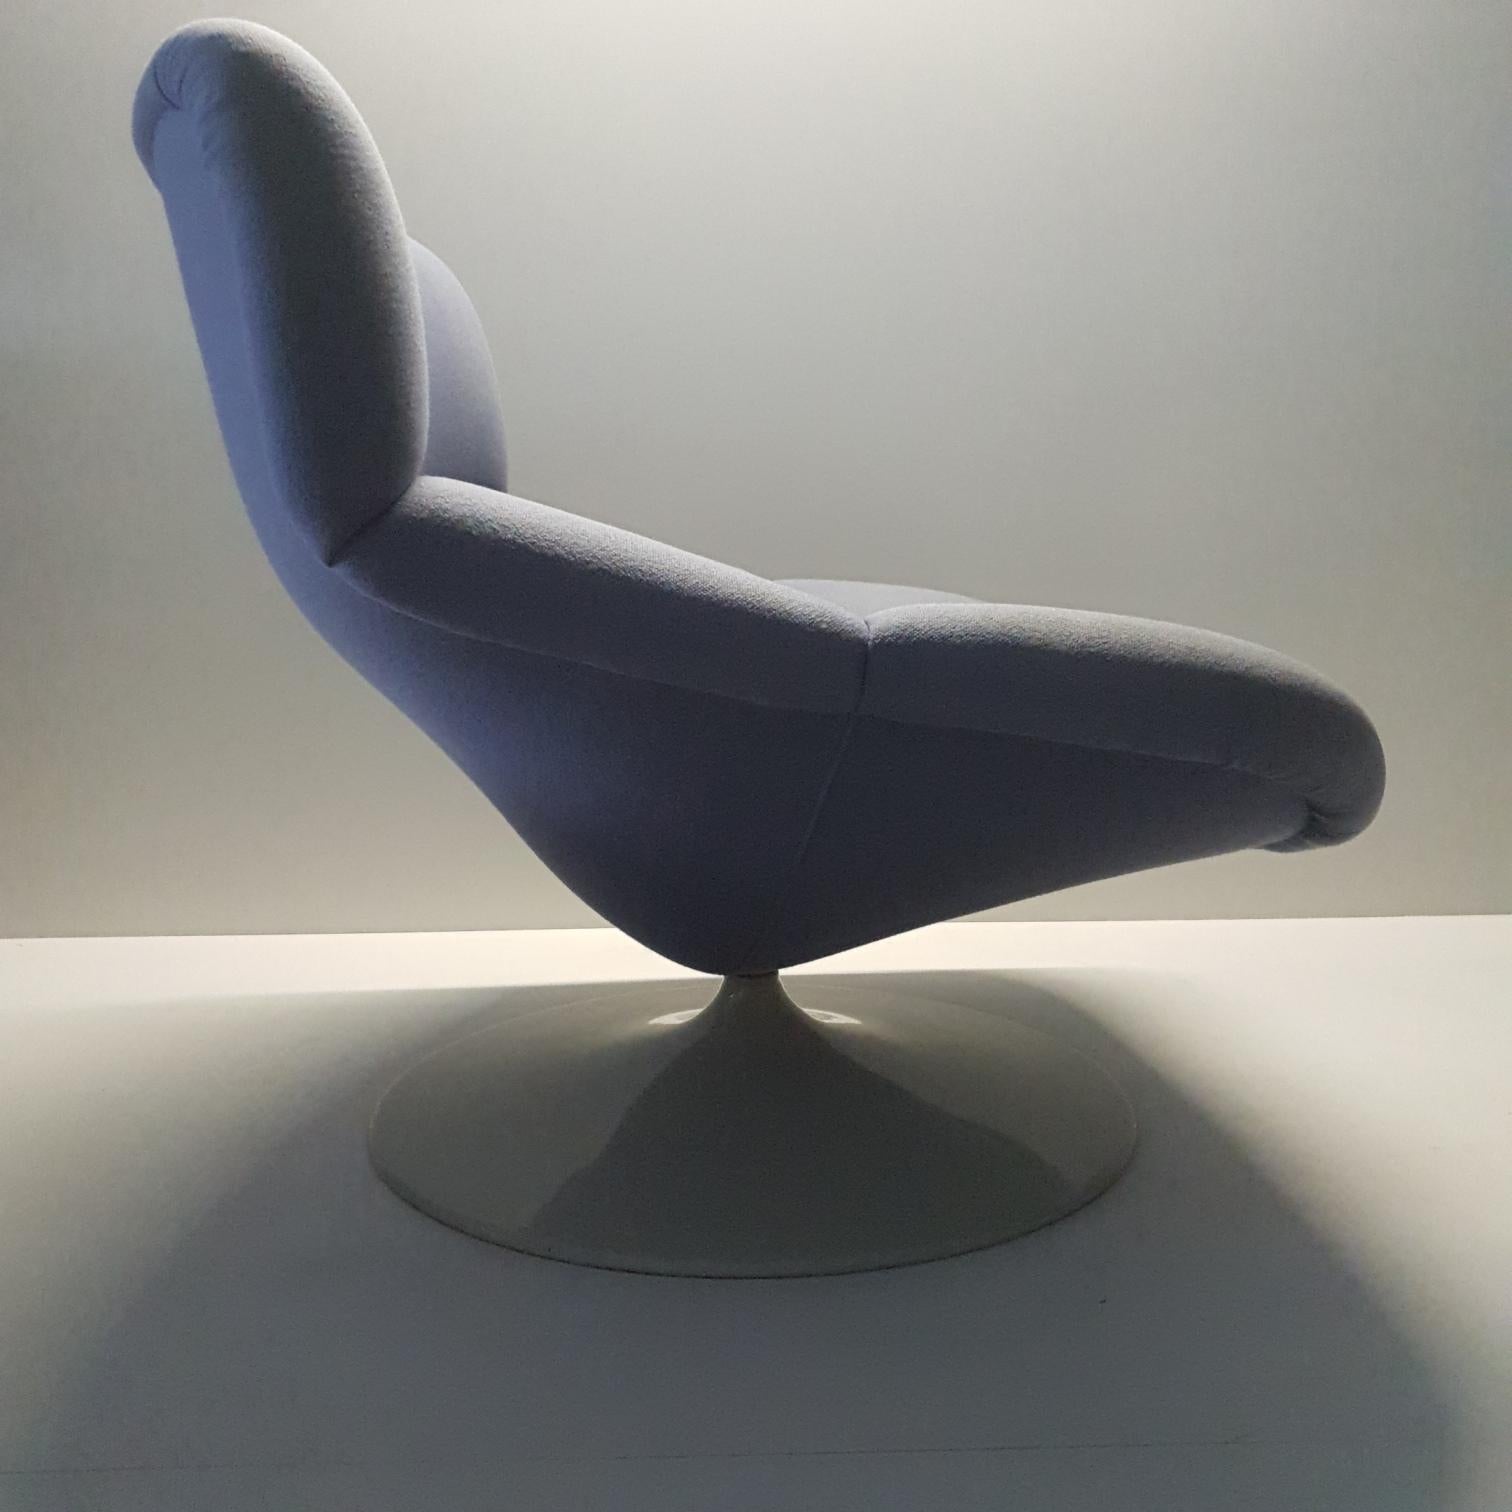 Swivel lounge chair F518 by Geoffrey Harcourt for Artifort (marked), 1979
Very large and comfortable lounge chair.
With the original woollen upholstery.